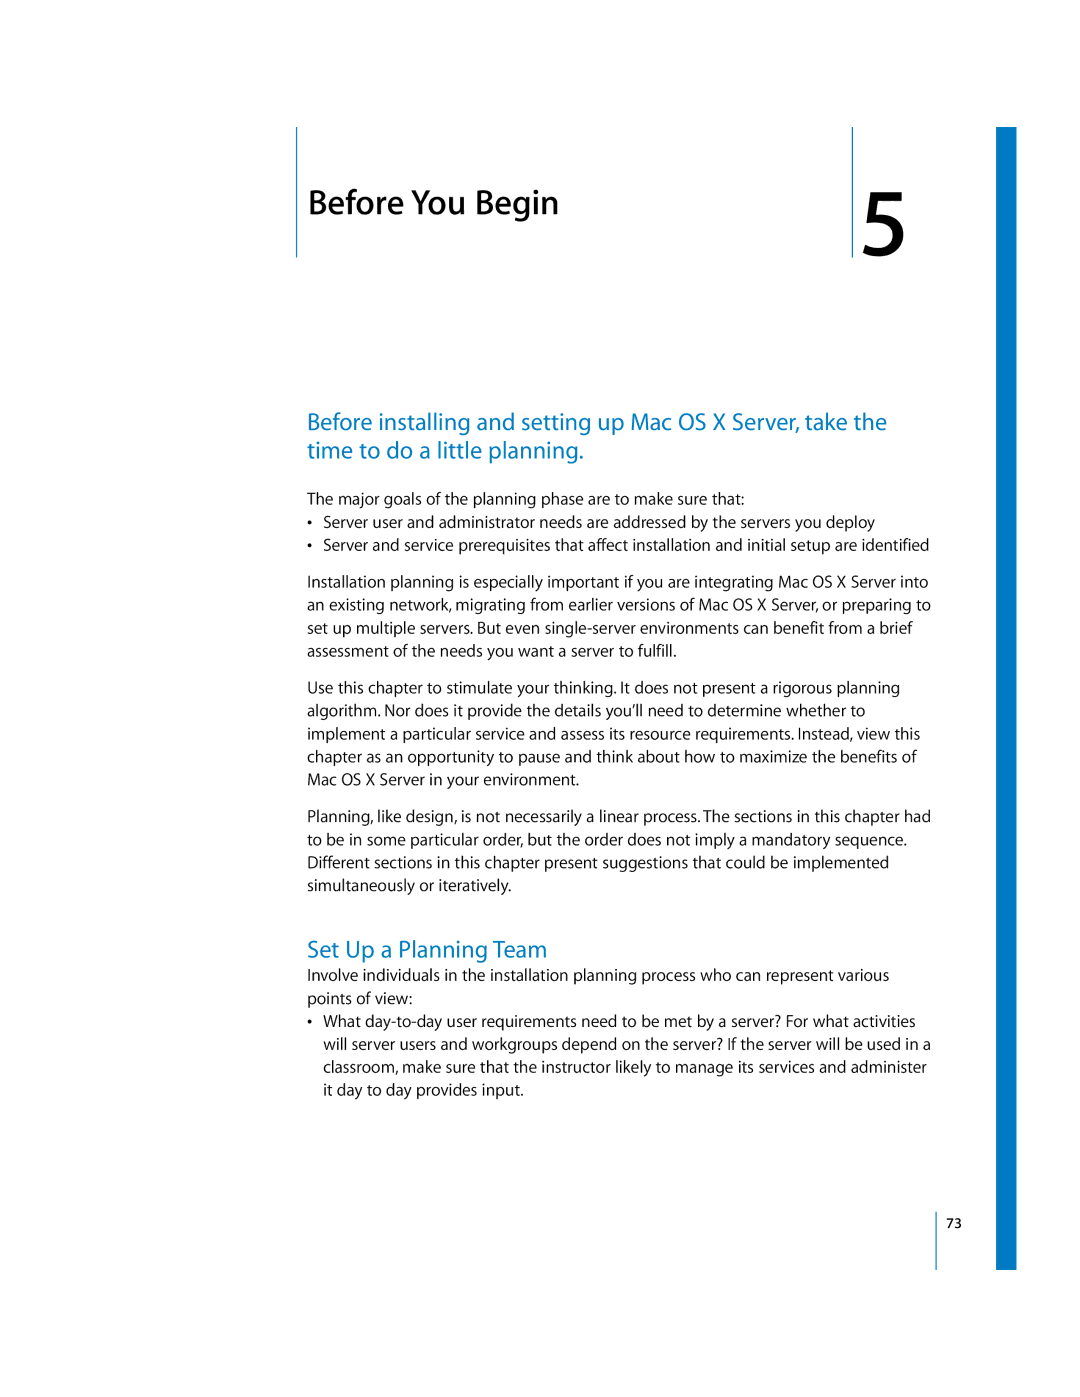 Apple 10.3 manual 5Before You Begin, Set Up a Planning Team 